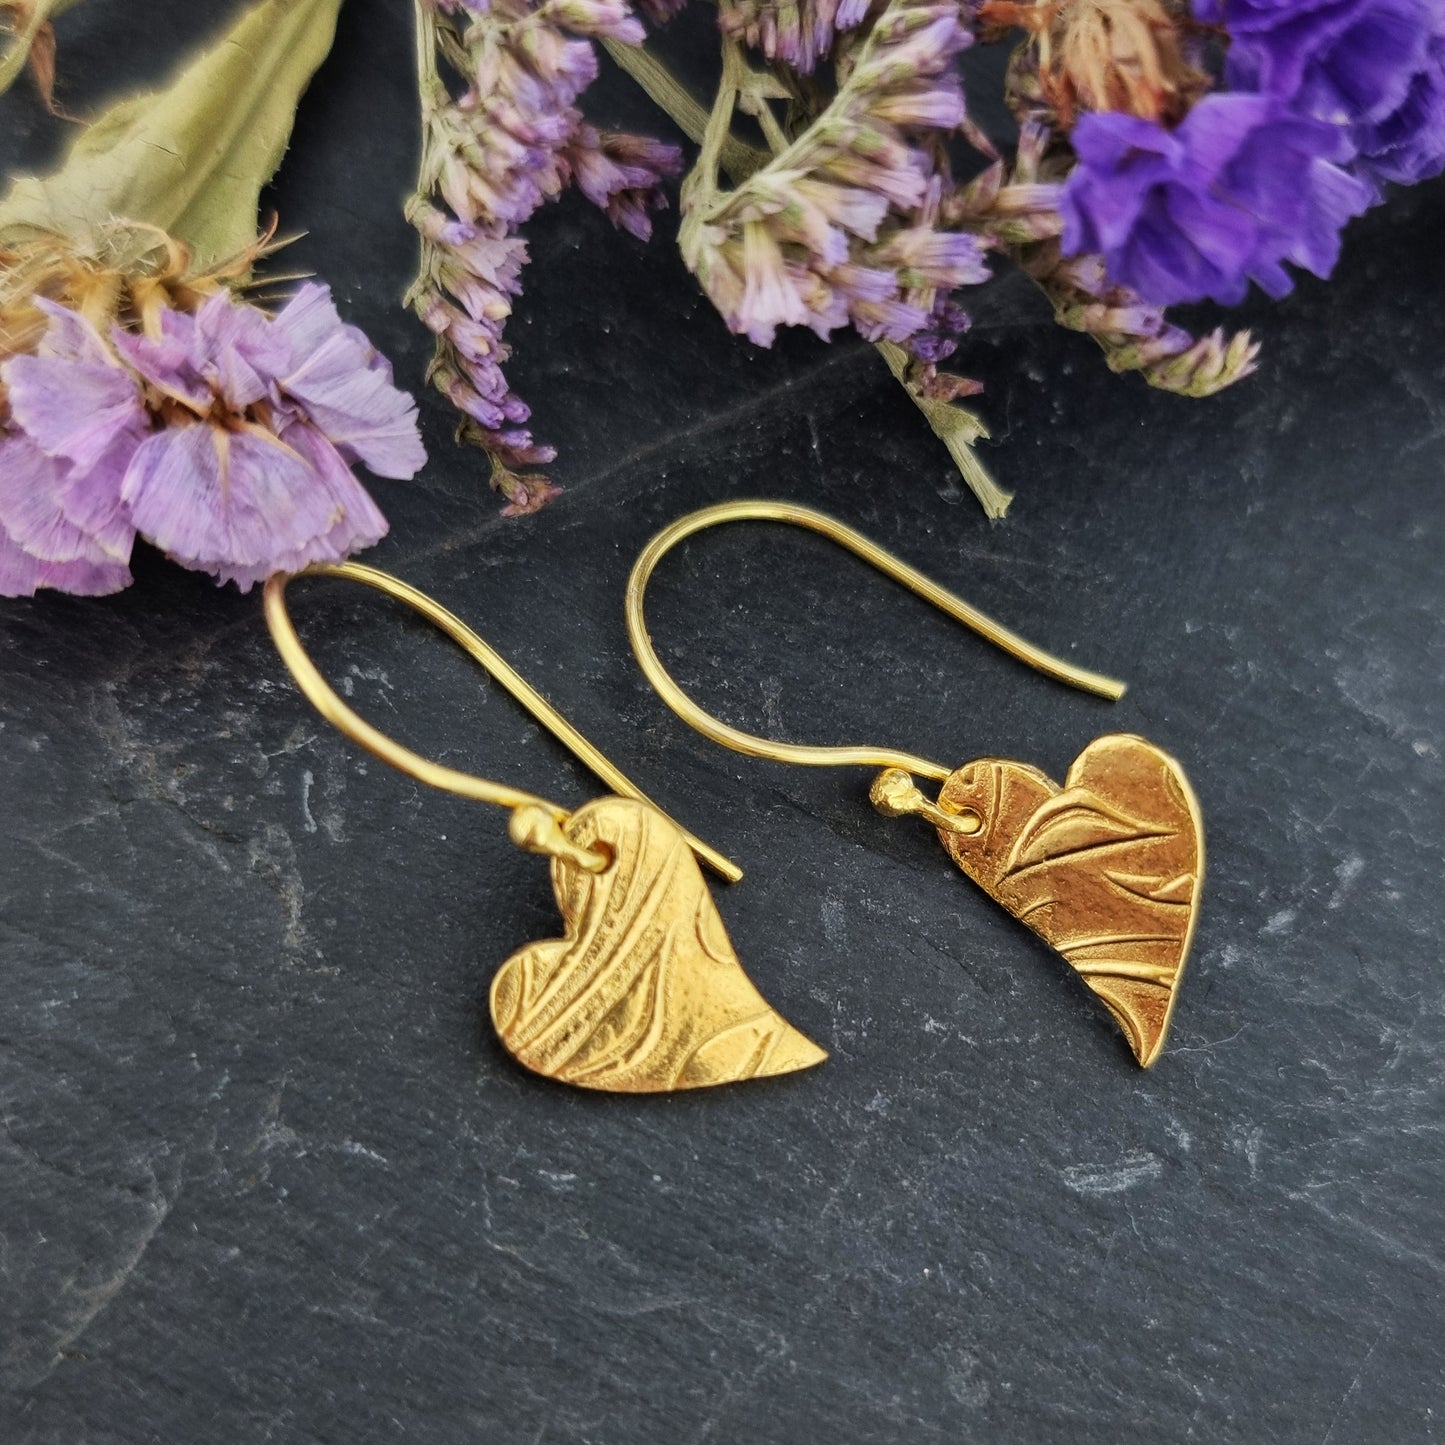 Yellow gold vermeil drop earrings featuring an asymmetrical heart with a leaf vine pattern suspended from an ear wire. Pictured with flowers.